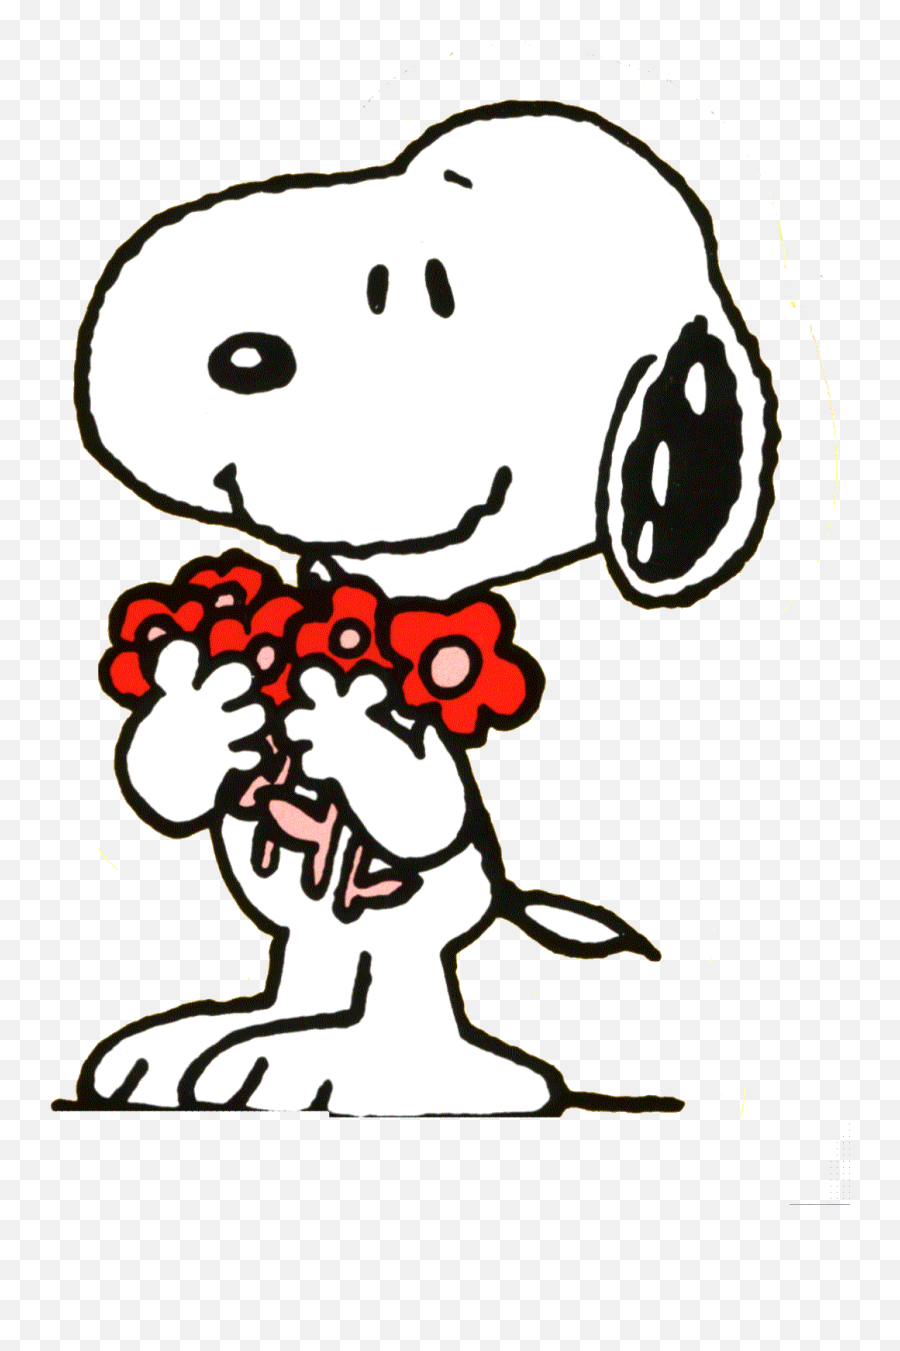 Snoopy Cartoon Hd Background Image For Htc One M9 - Cartoons Snoopy Holding Flowers Png,Snoopy Transparent